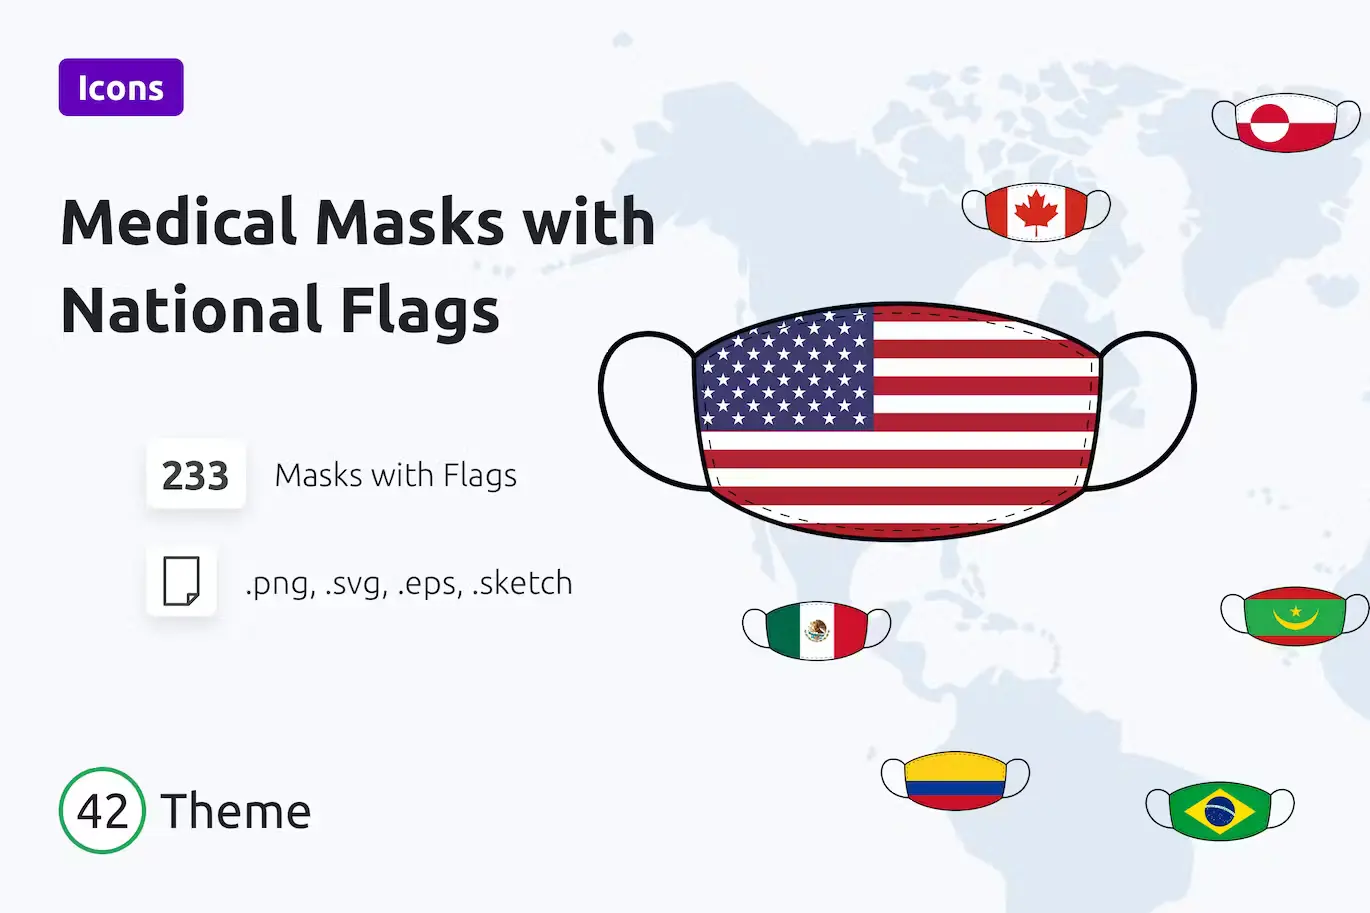 Medical Masks with National Flags